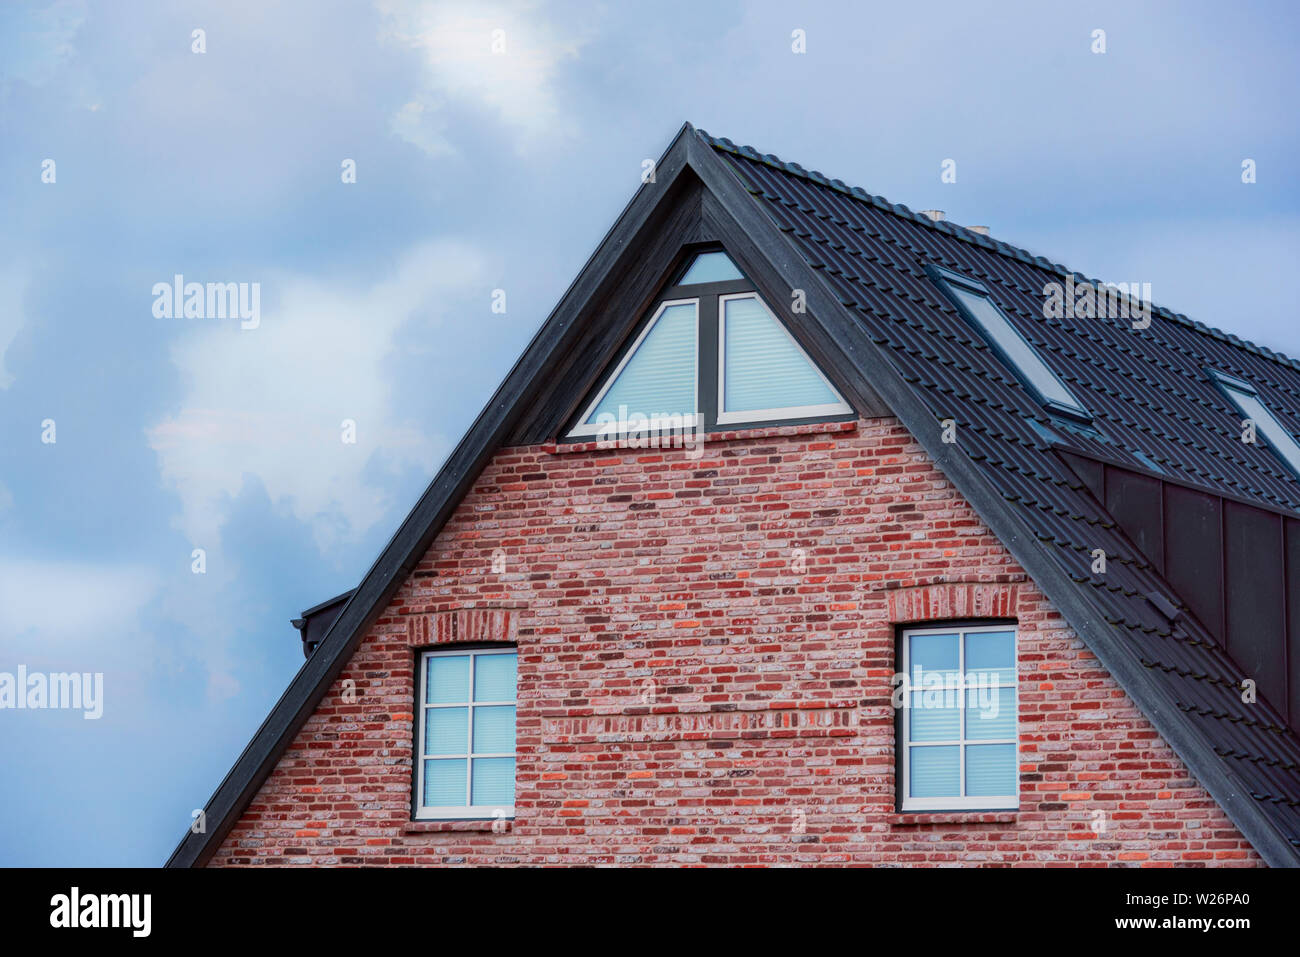 Traditional frisian house on the island Sylt, Germany in the Wadden Sea. Red-brick wall with black tile roof Stock Photo